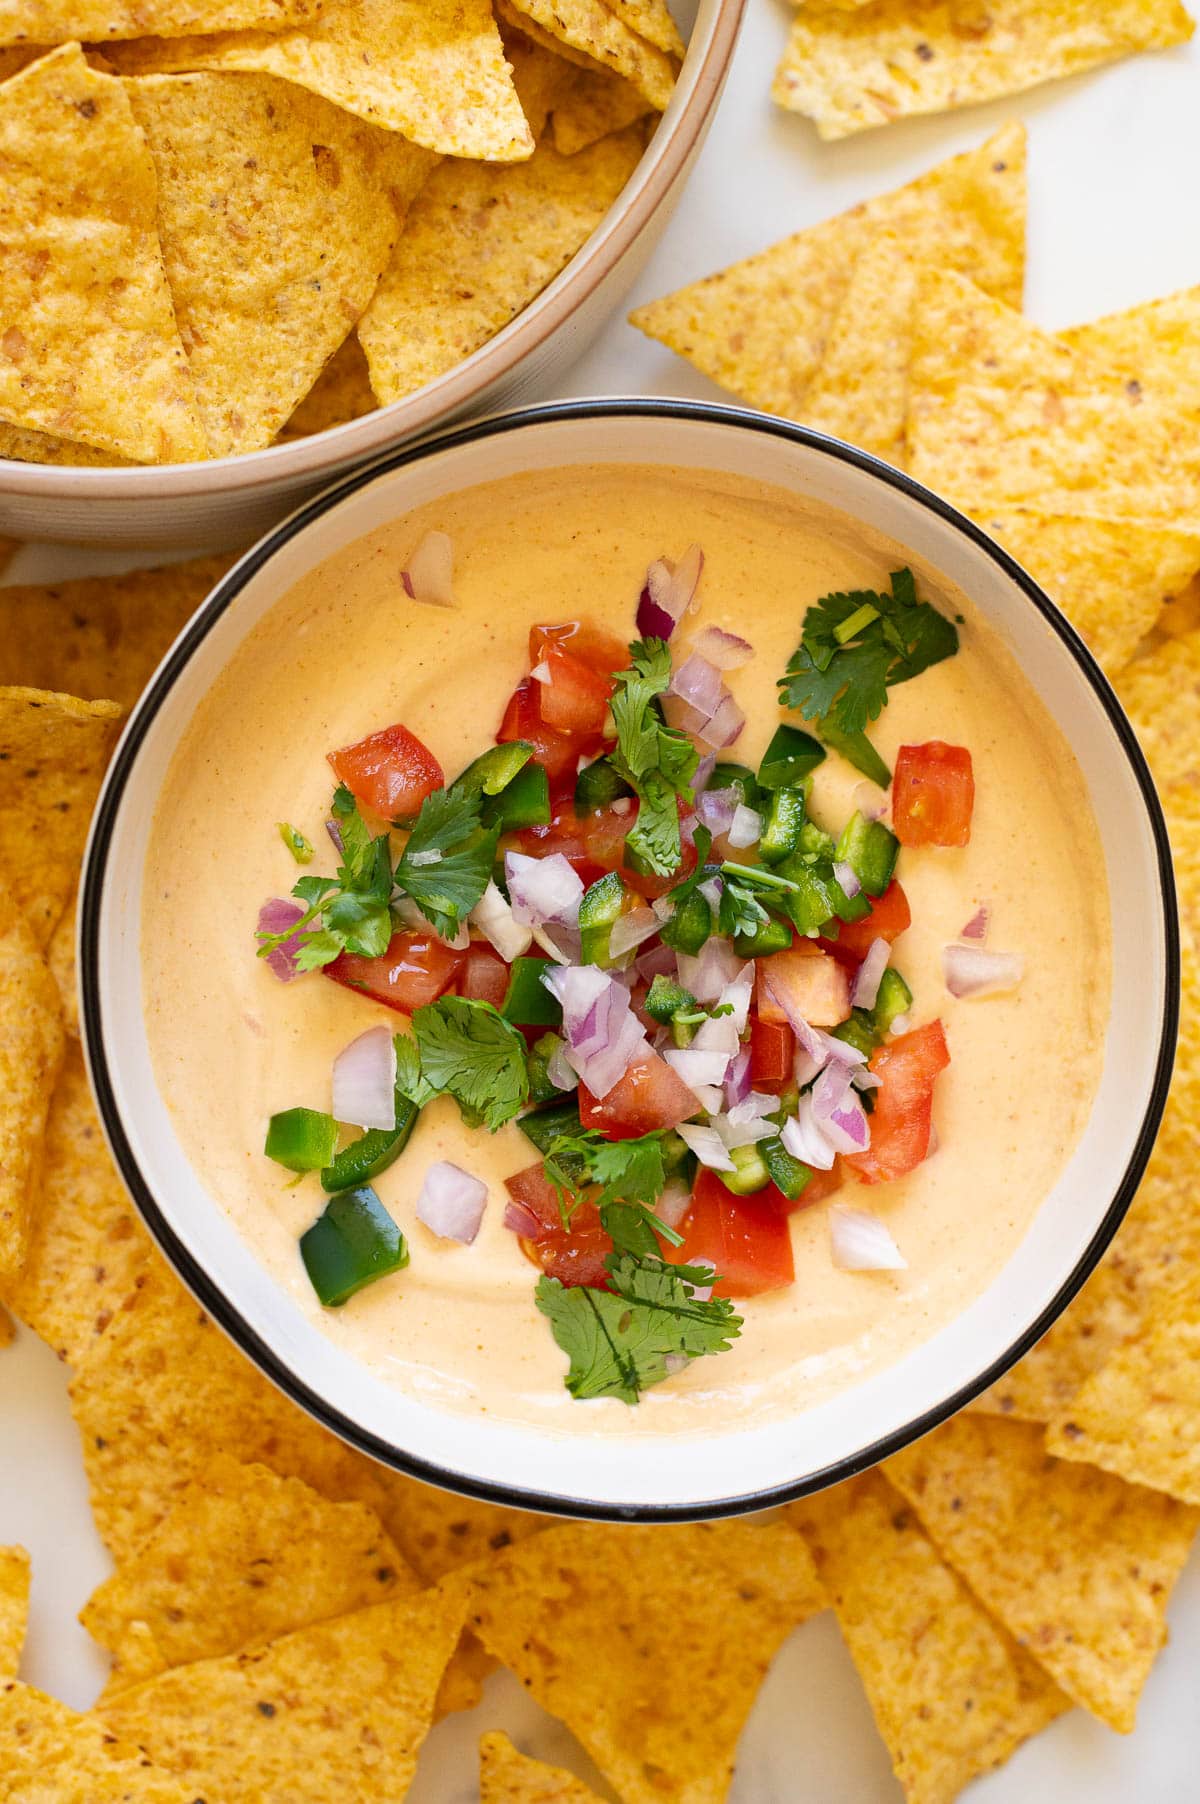 Cottage cheese queso dip in a bowl garnished with toppings. Tortilla chips in a bowl and on a counter around it.